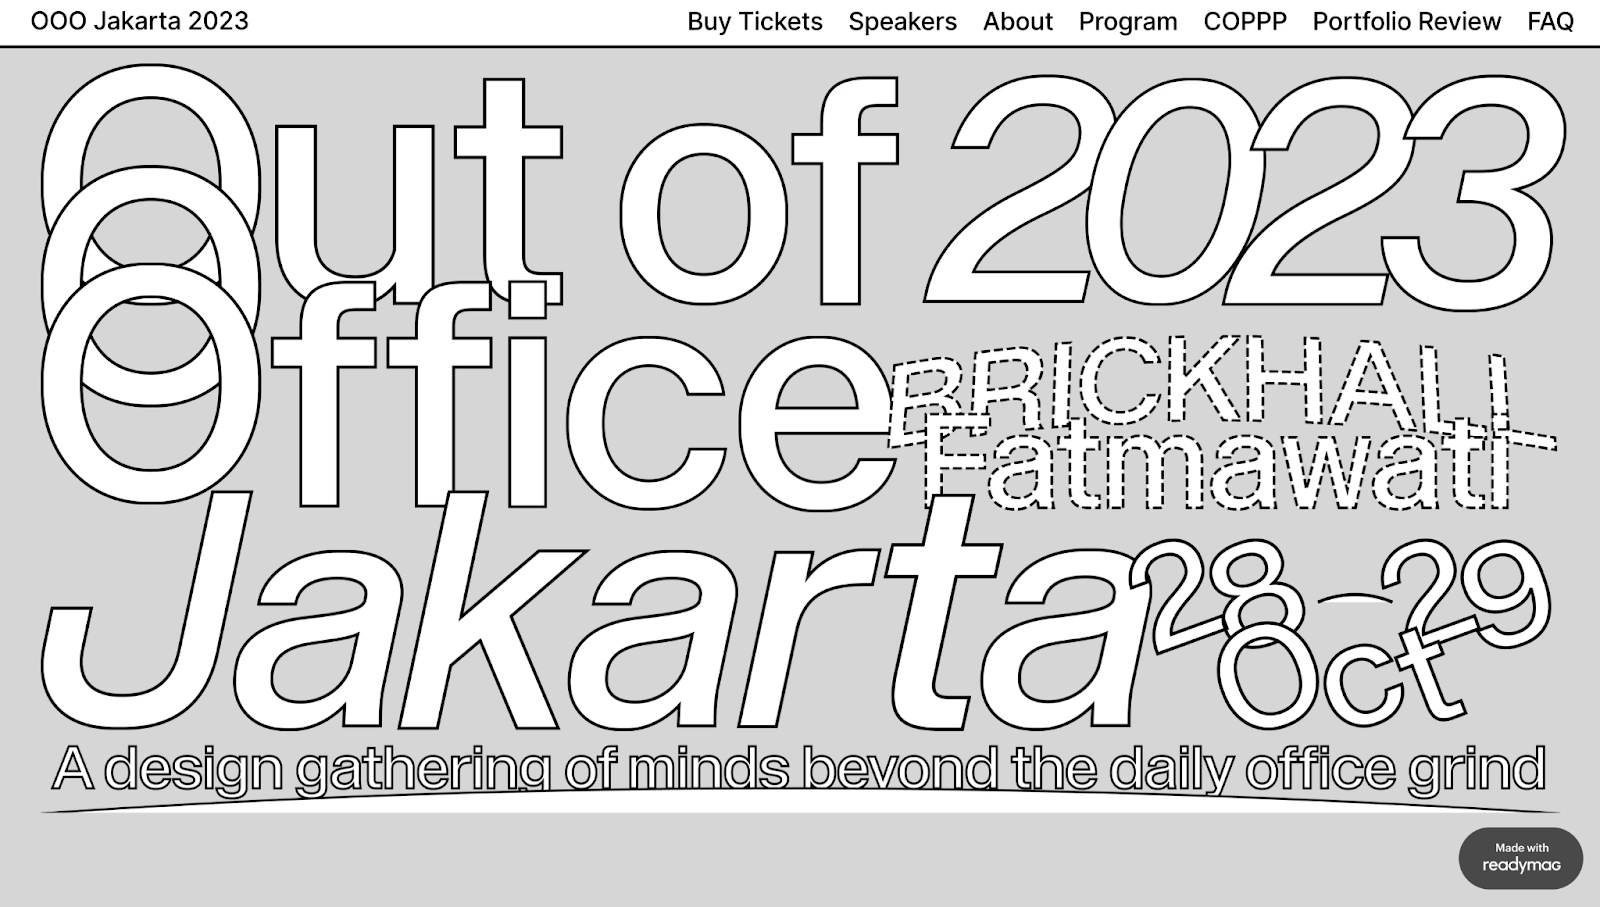 The “OOO Jakarta 2023” website was made with Readymag